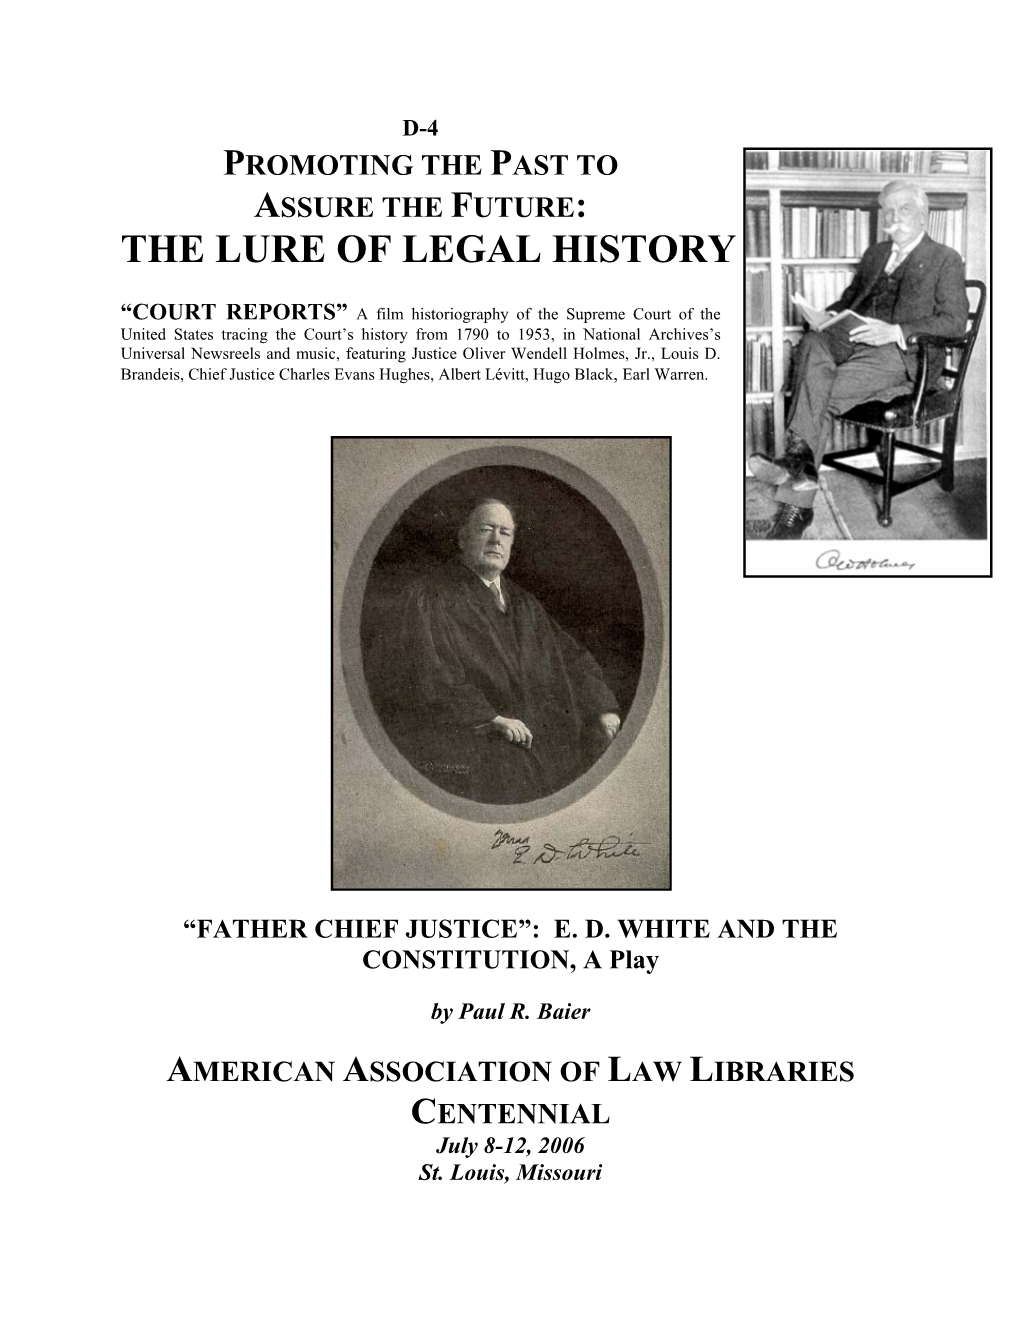 “Father Chief Justice”: Ed White and the Constitution